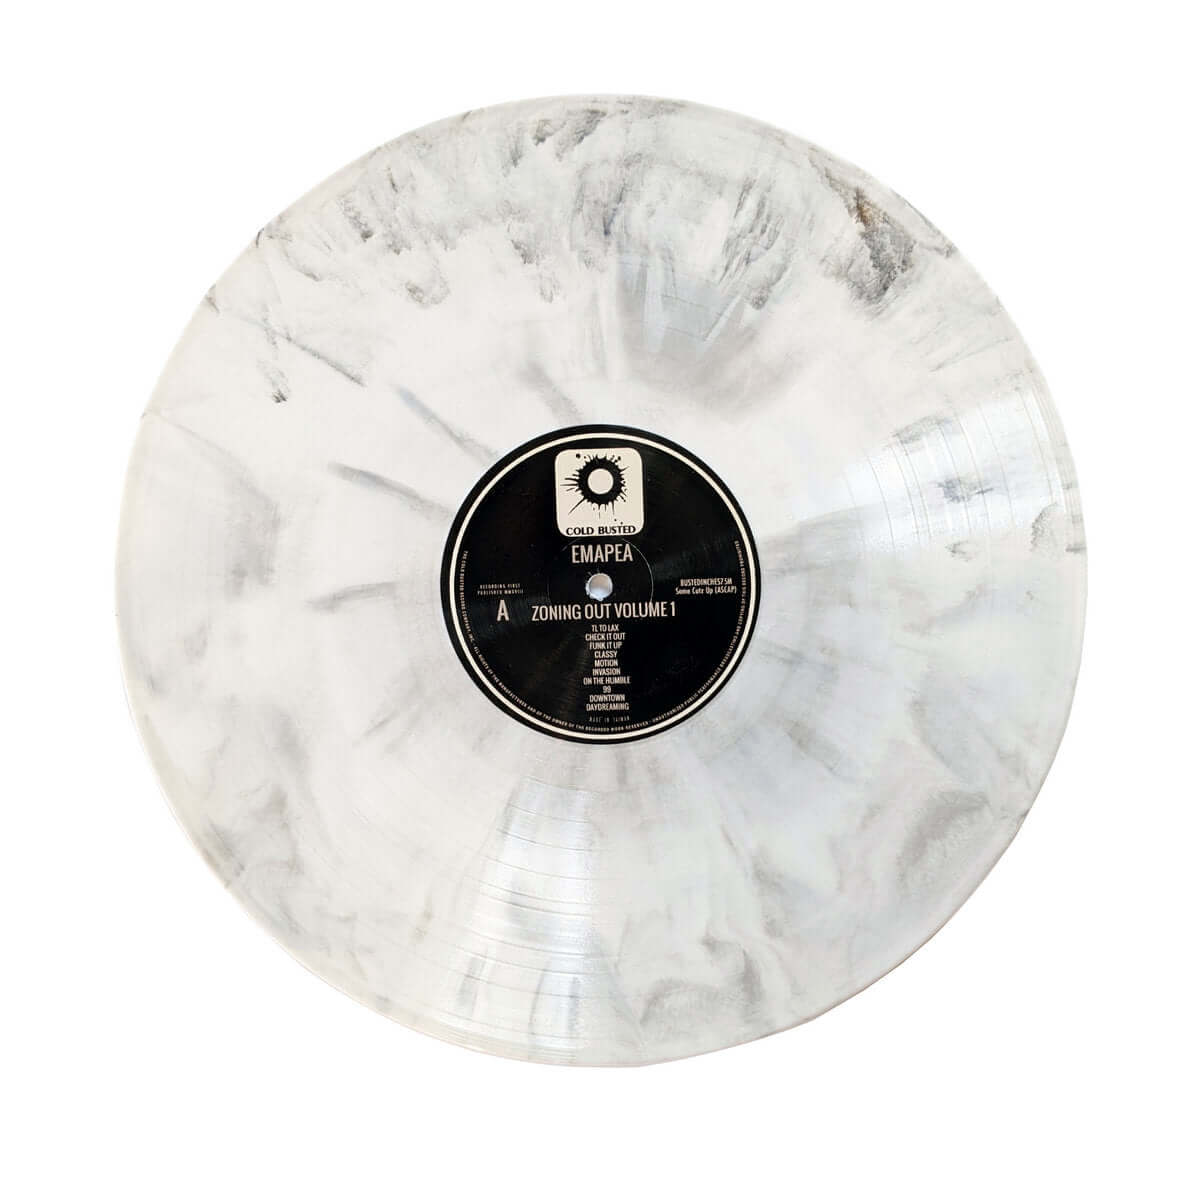 Emapea - Zoning Out Volume 1 - Limited Edition Black and White Marbled Colored 12 Inch Vinyl - Cold Busted